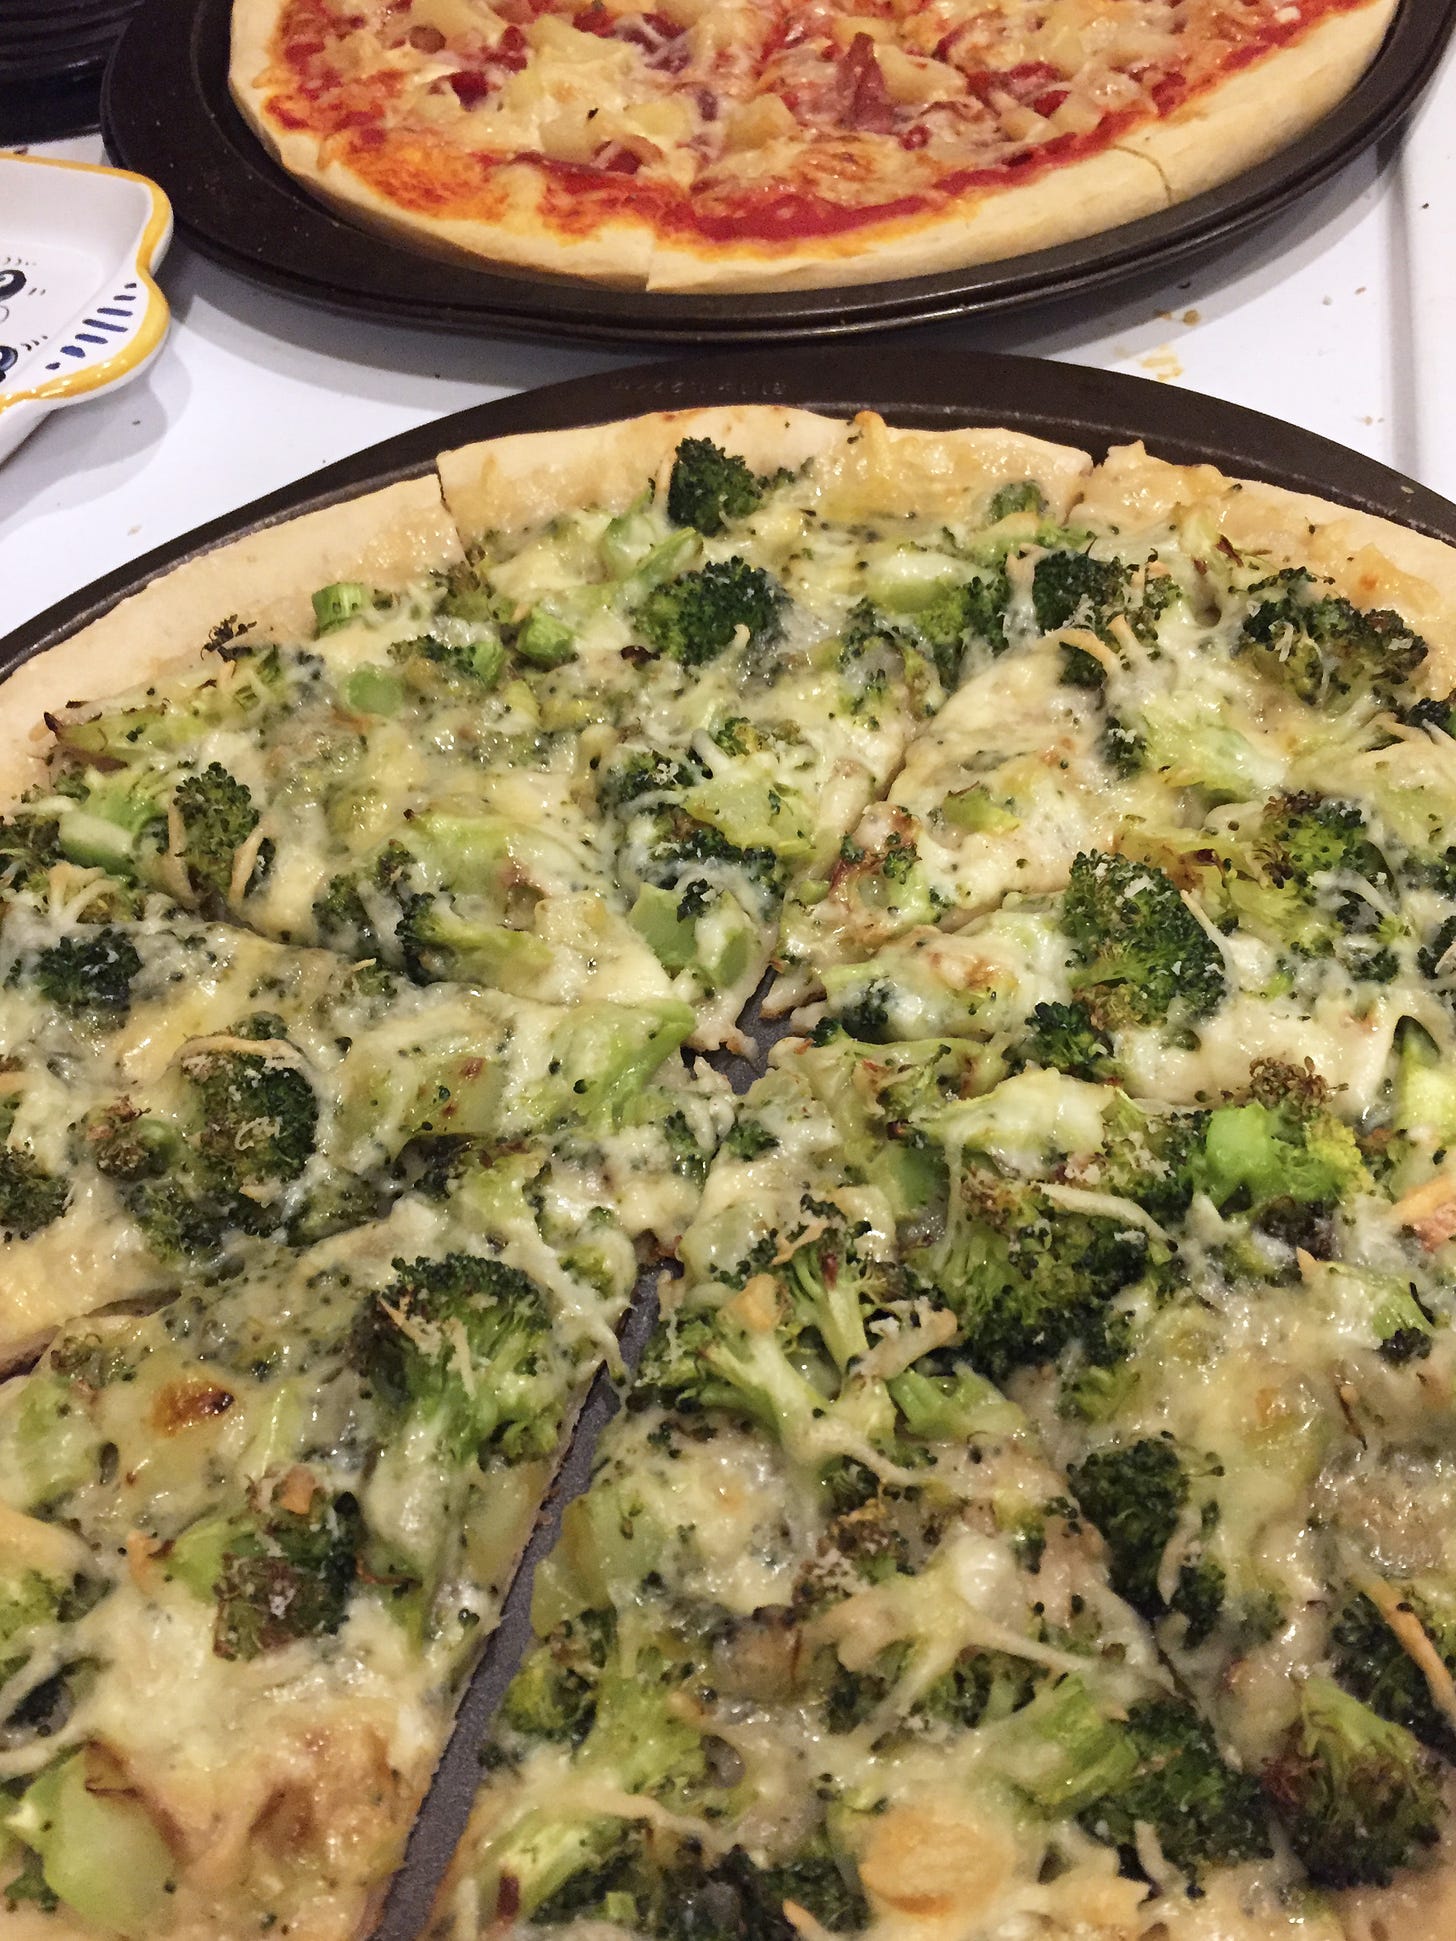 two pizzas in their pans. In the foreground, a broccoli pizza with white sauce. In the background, capocollo and pineapple with red sauce.